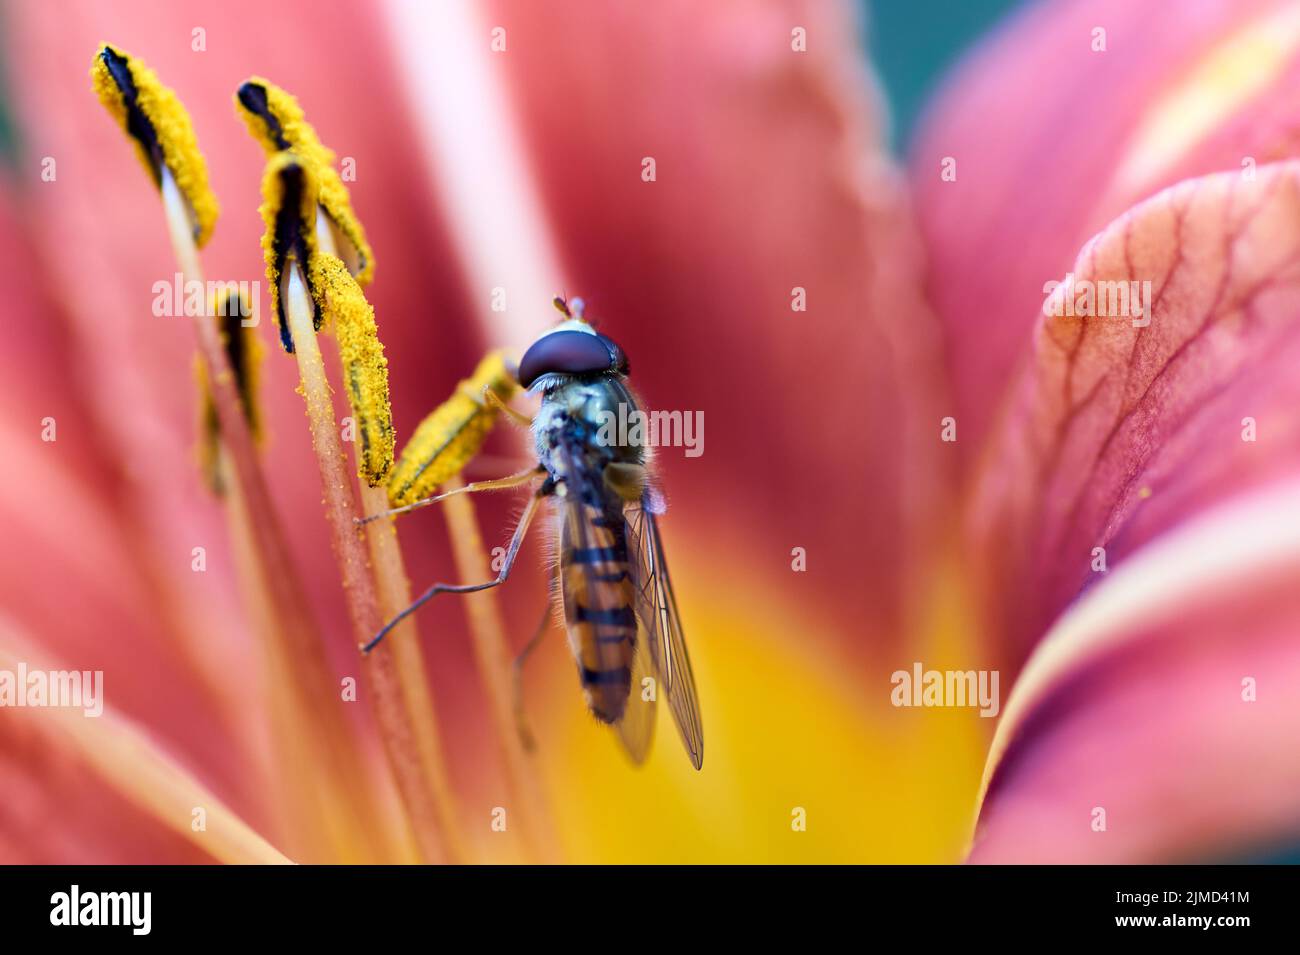 Closeup view of a hoverfly - family Syrphidae Stock Photo